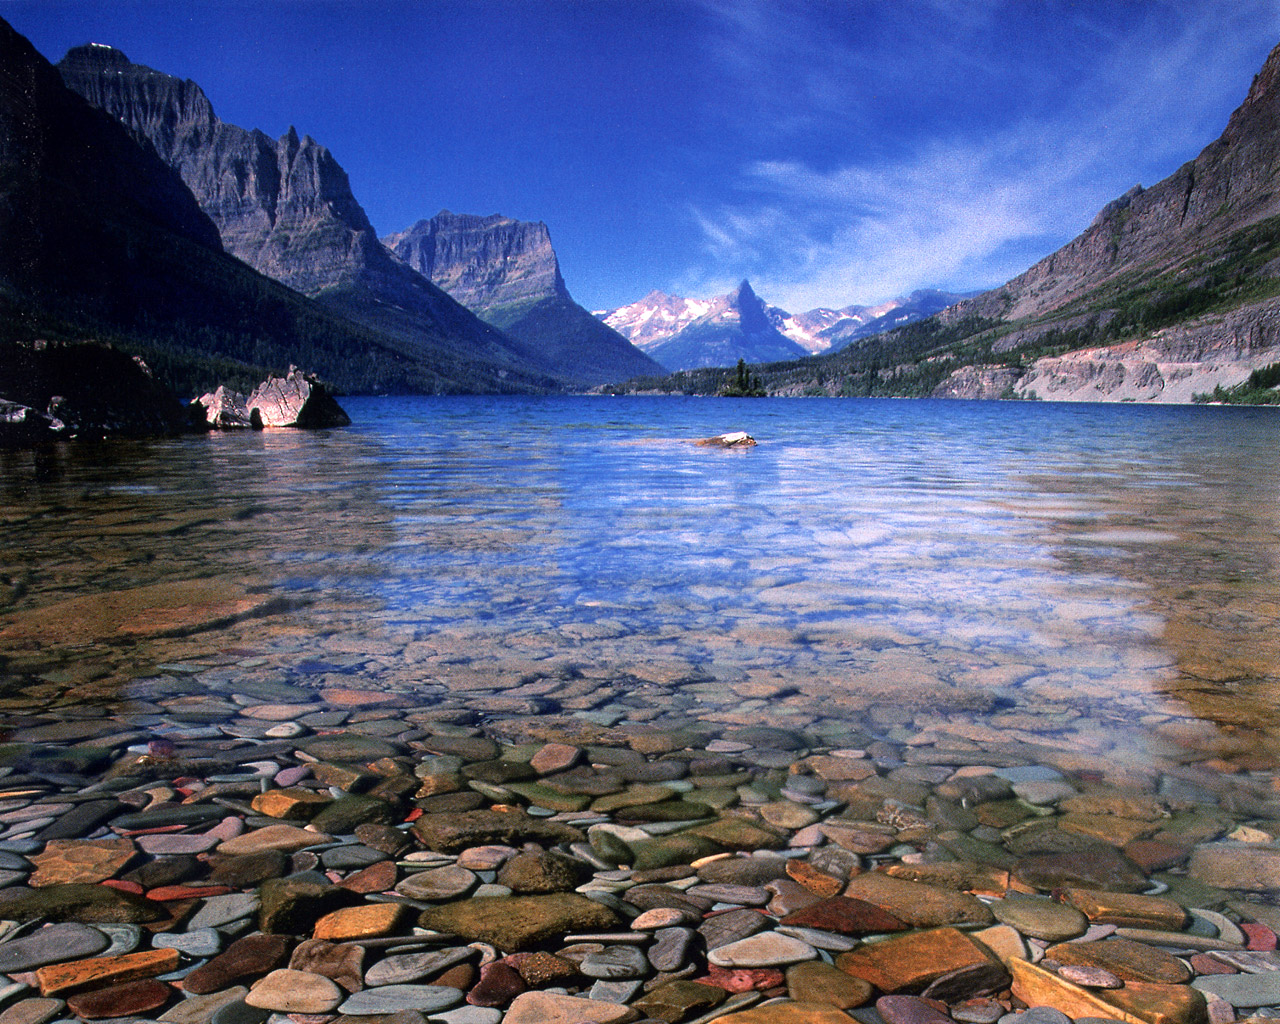 Redefining The Face Of Beauty Glacier National Park Montana